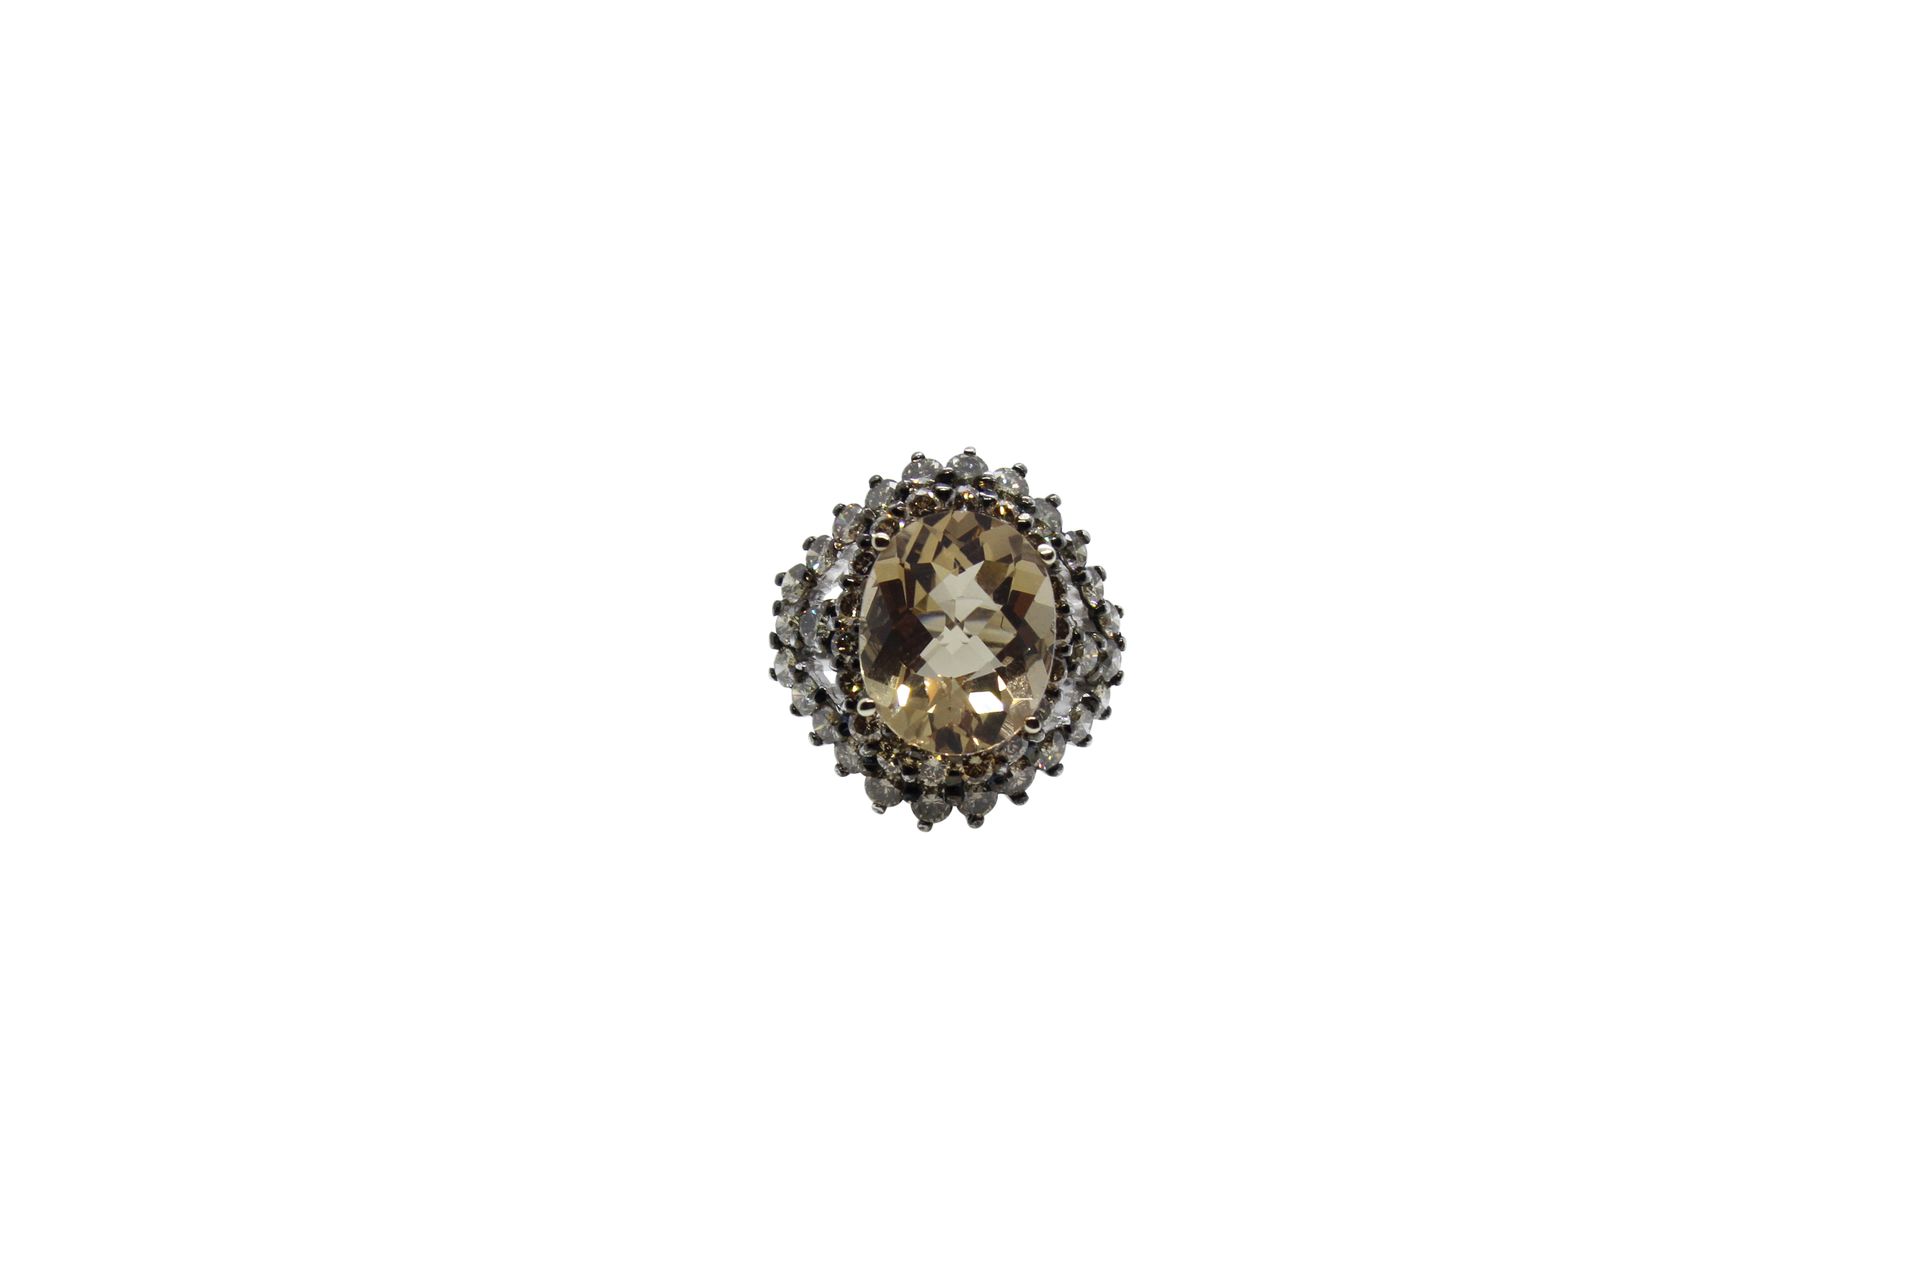 14k gold ring with approx. 2 ct diamonds and center topaz stone 
Bague en or 14k&hellip;